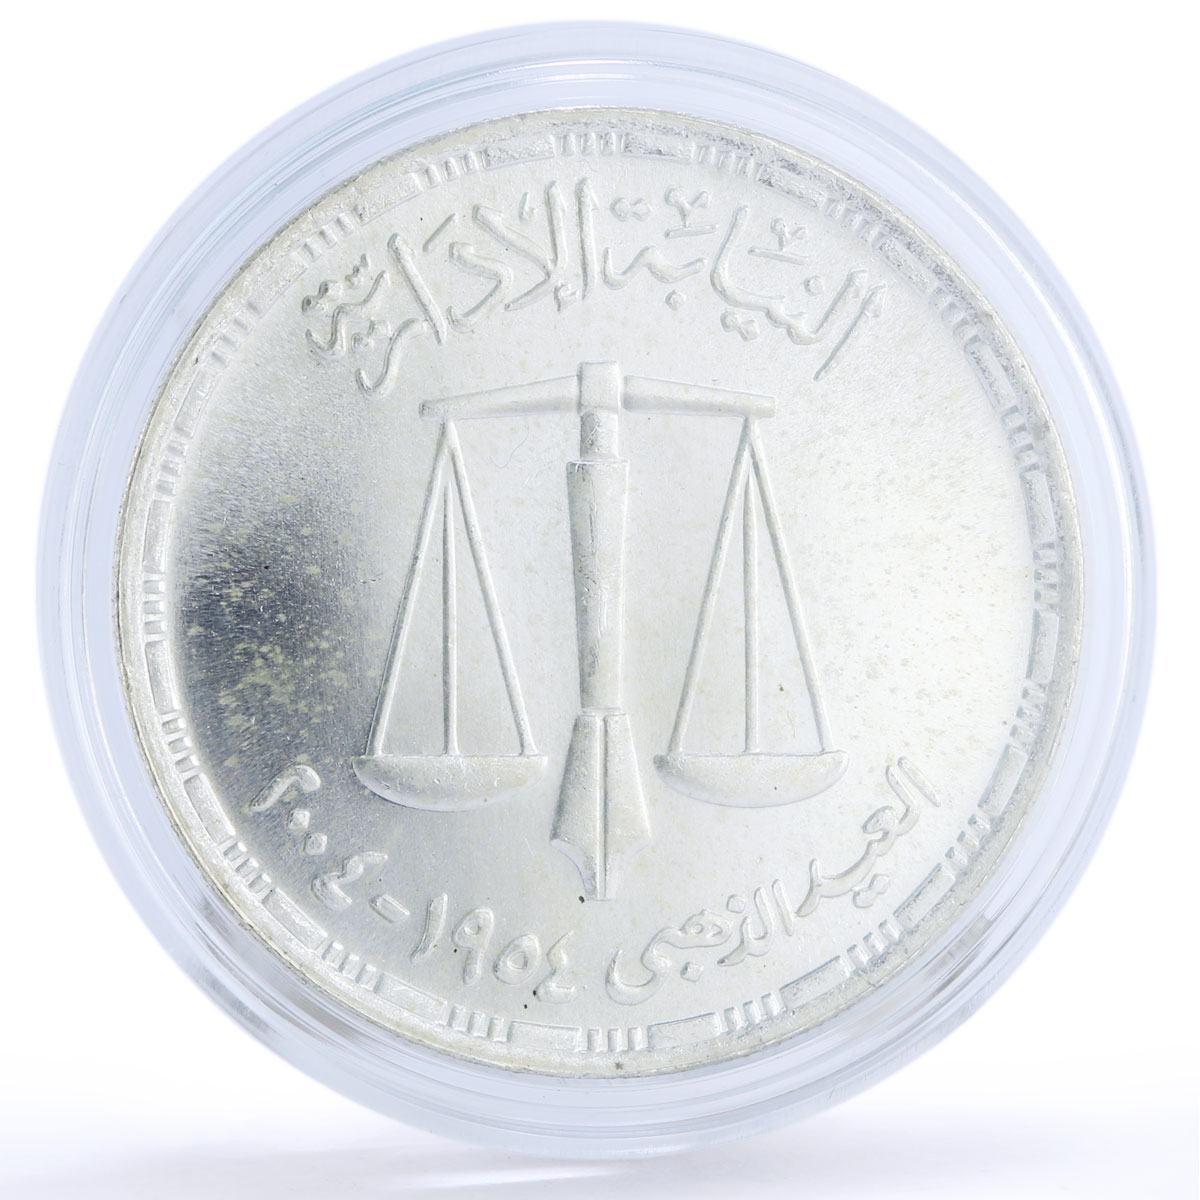 Egypt 5 pounds Administrative Attorney Golden Jubilee Scales silver coin 2004